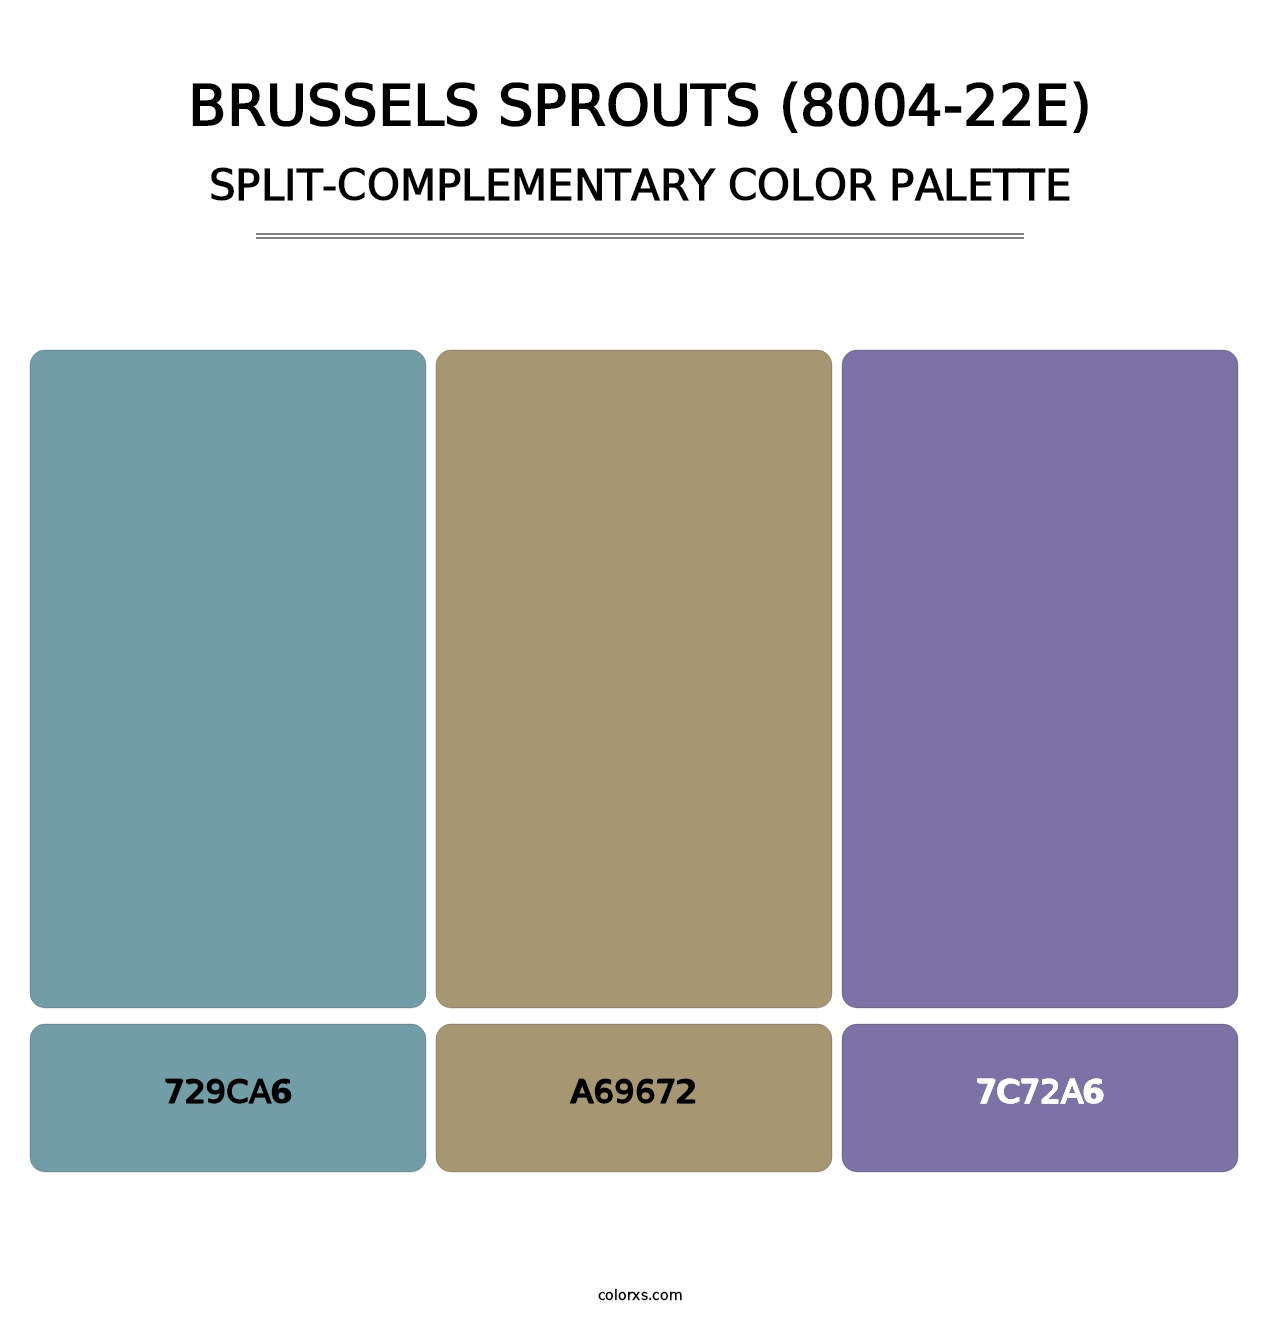 Brussels Sprouts (8004-22E) - Split-Complementary Color Palette